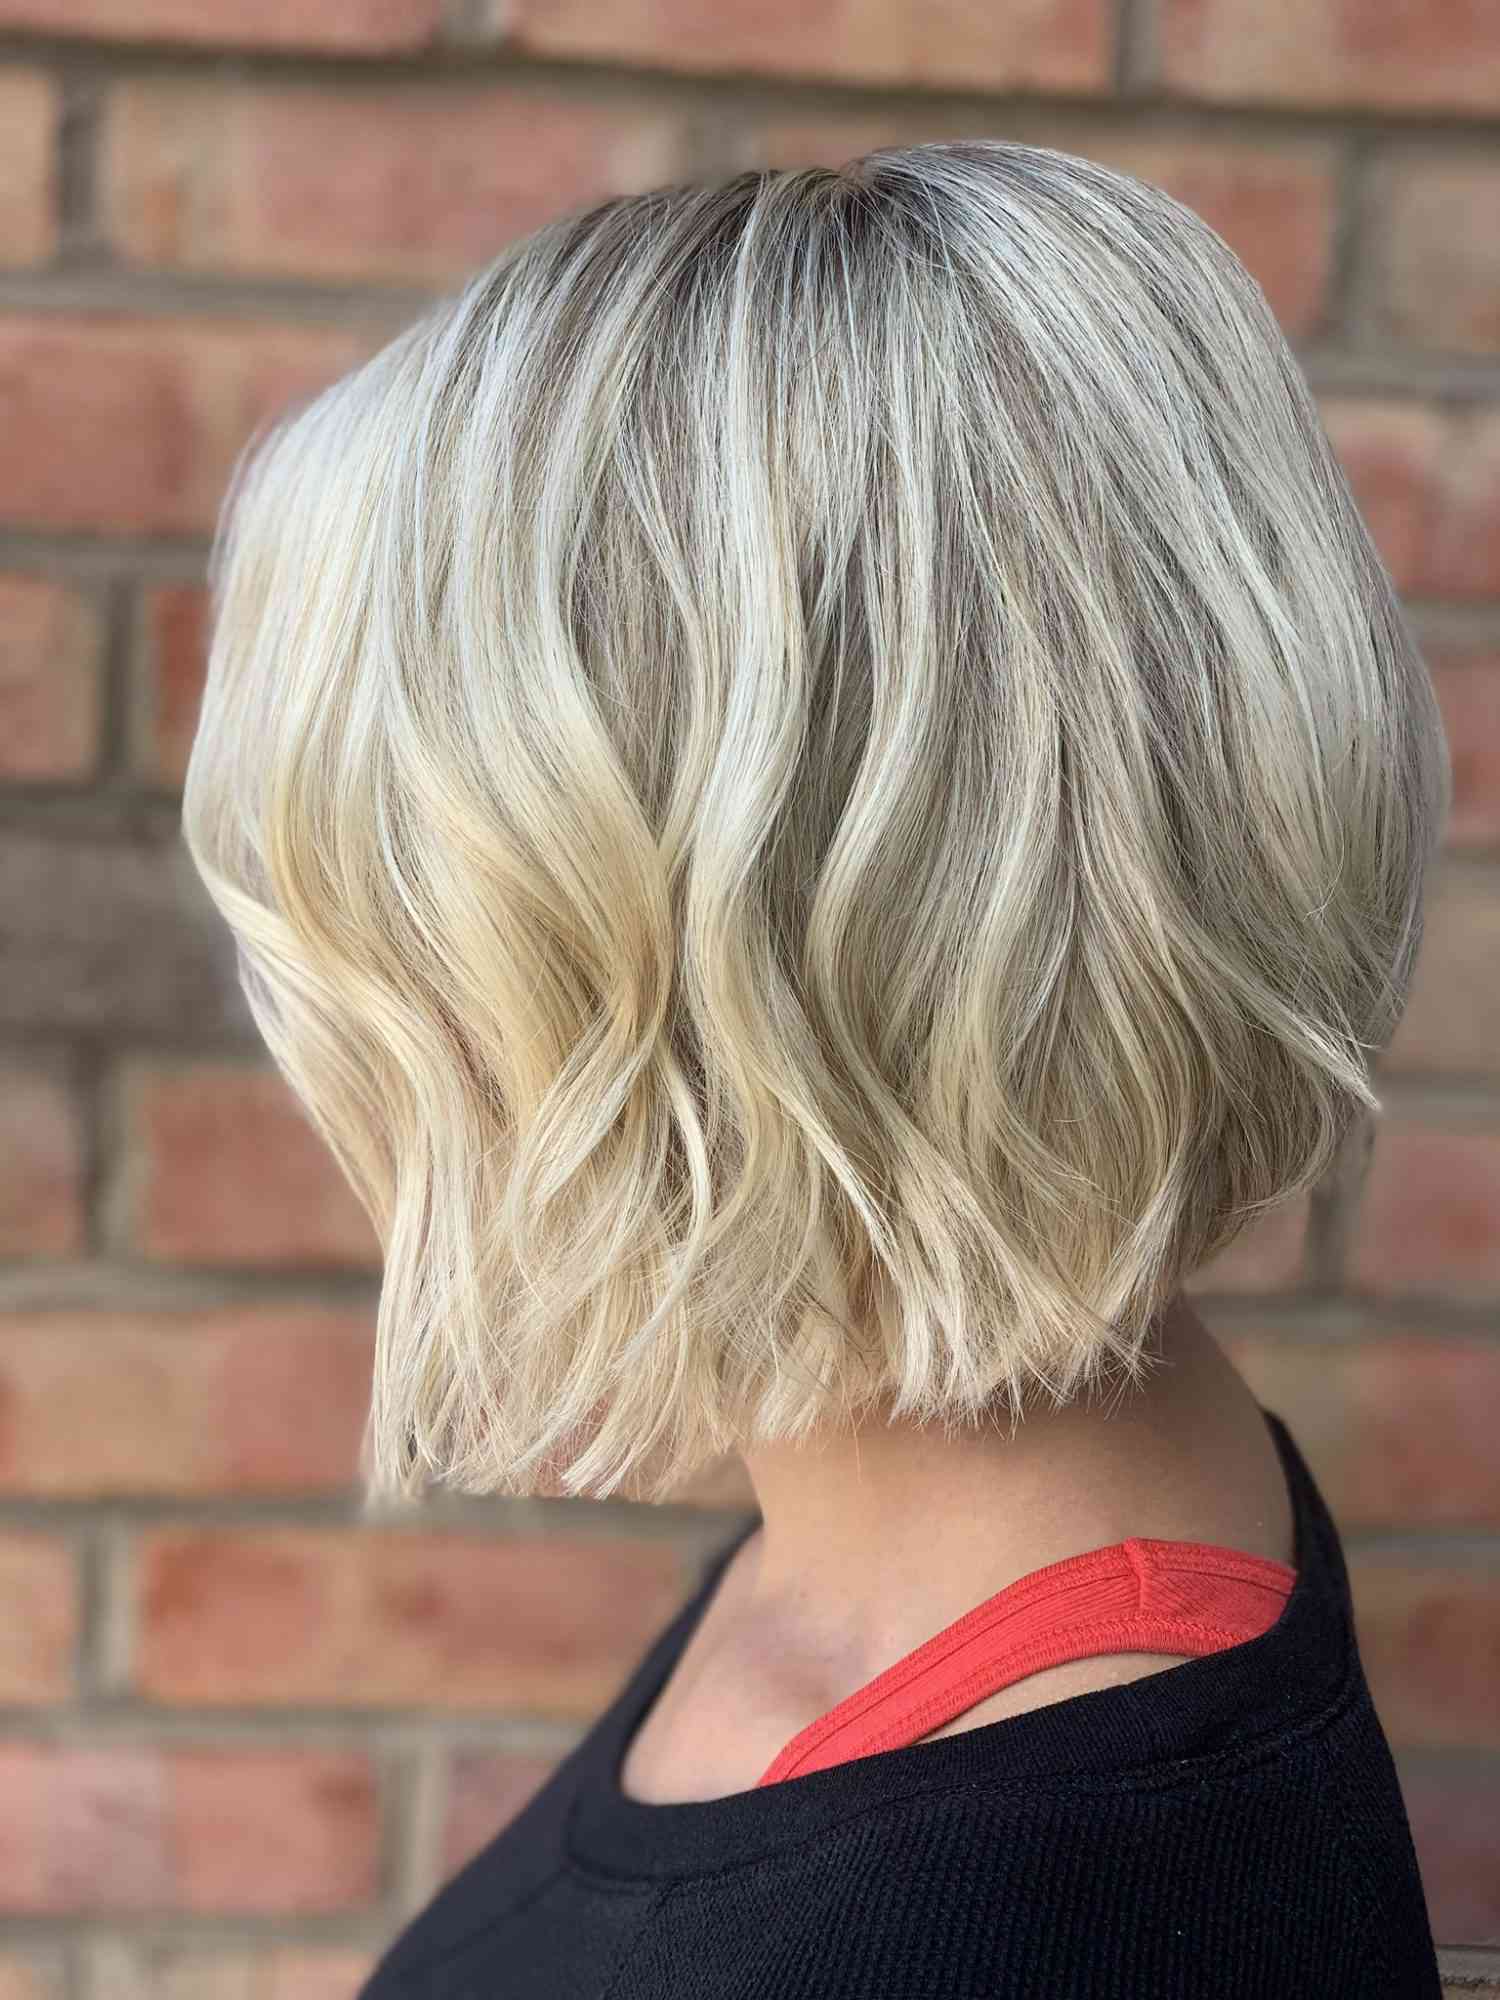 Short Hair Styles For Women In Their 50's